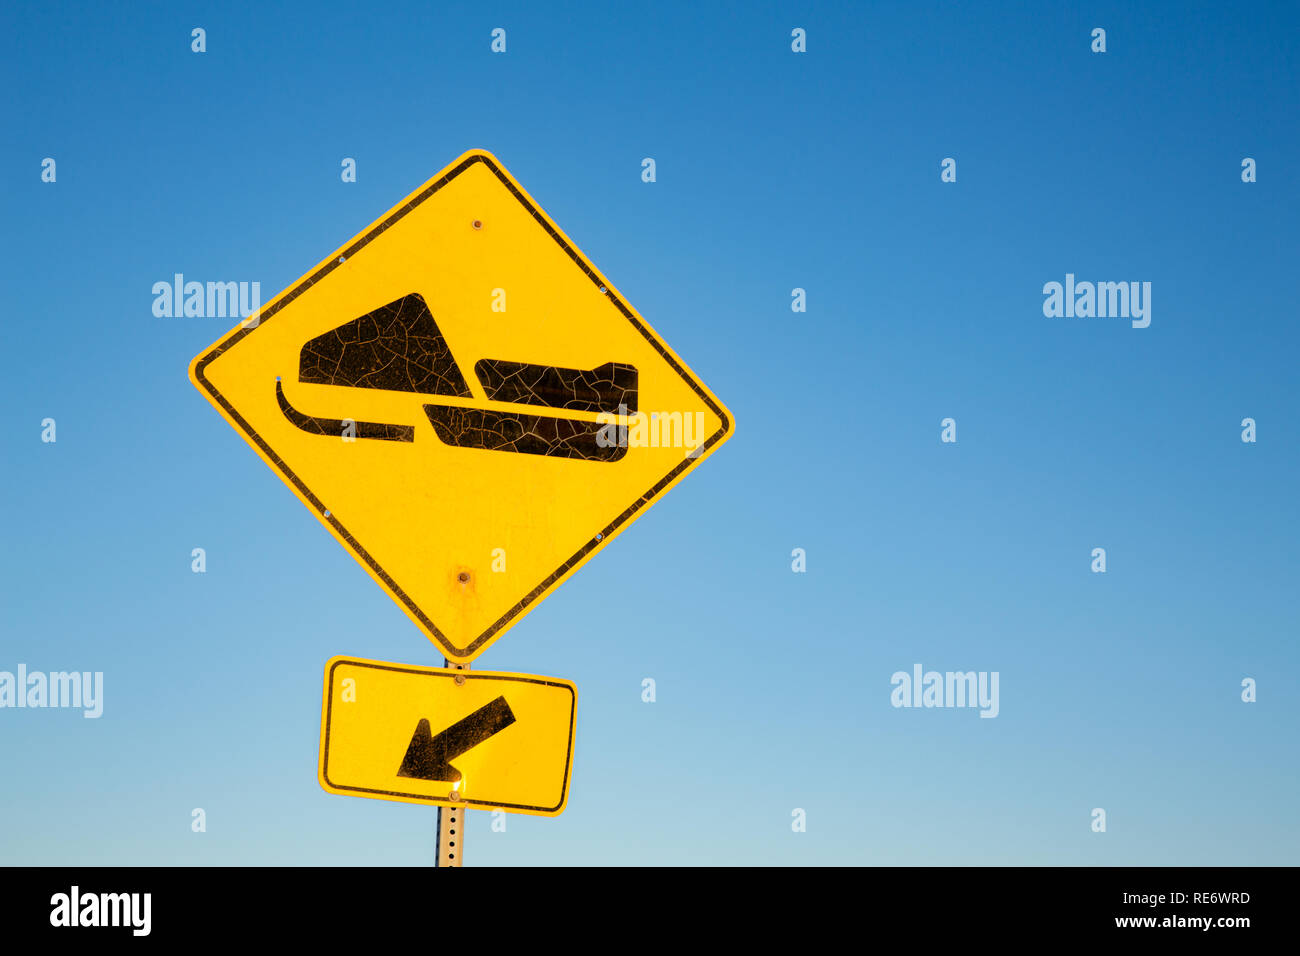 Yellow road sign for Skidoo or Snowmobile trail, with blue sky background and space for text. Quebec Province, Canada. Stock Photo